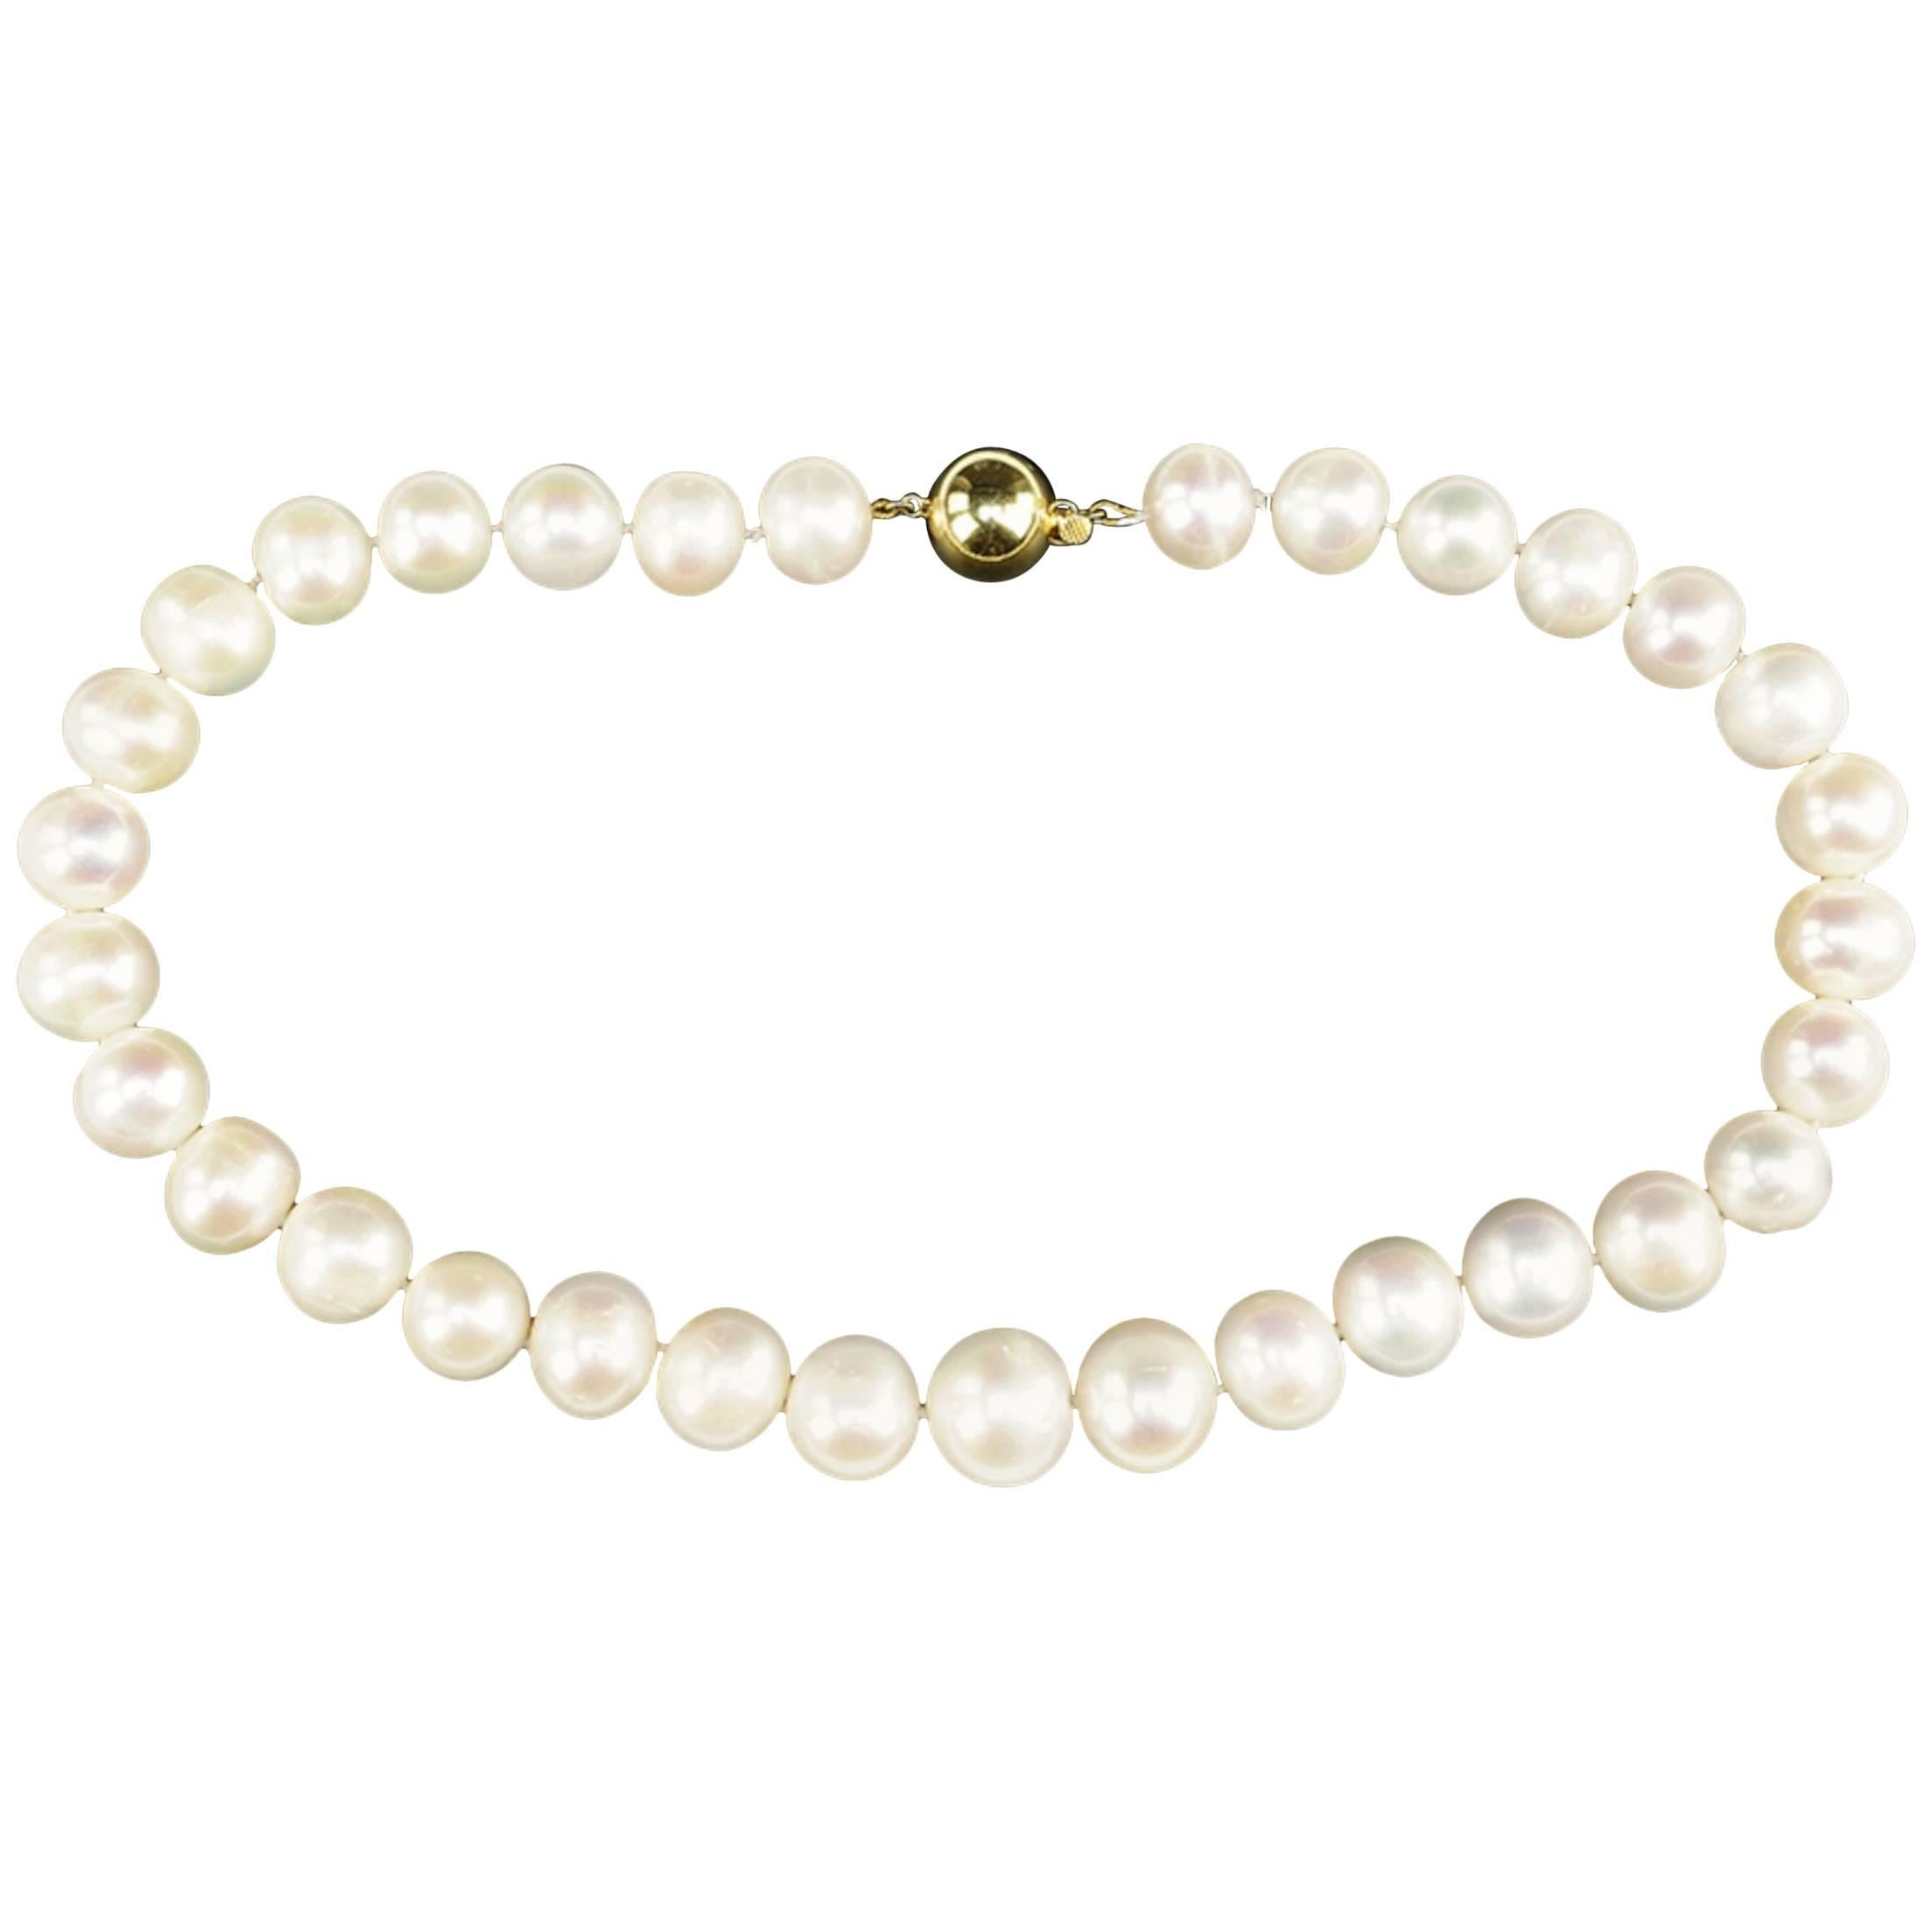 Spectacular Graduated Pearl Necklace 12.5-16 Mm with 14-Karat Clasp